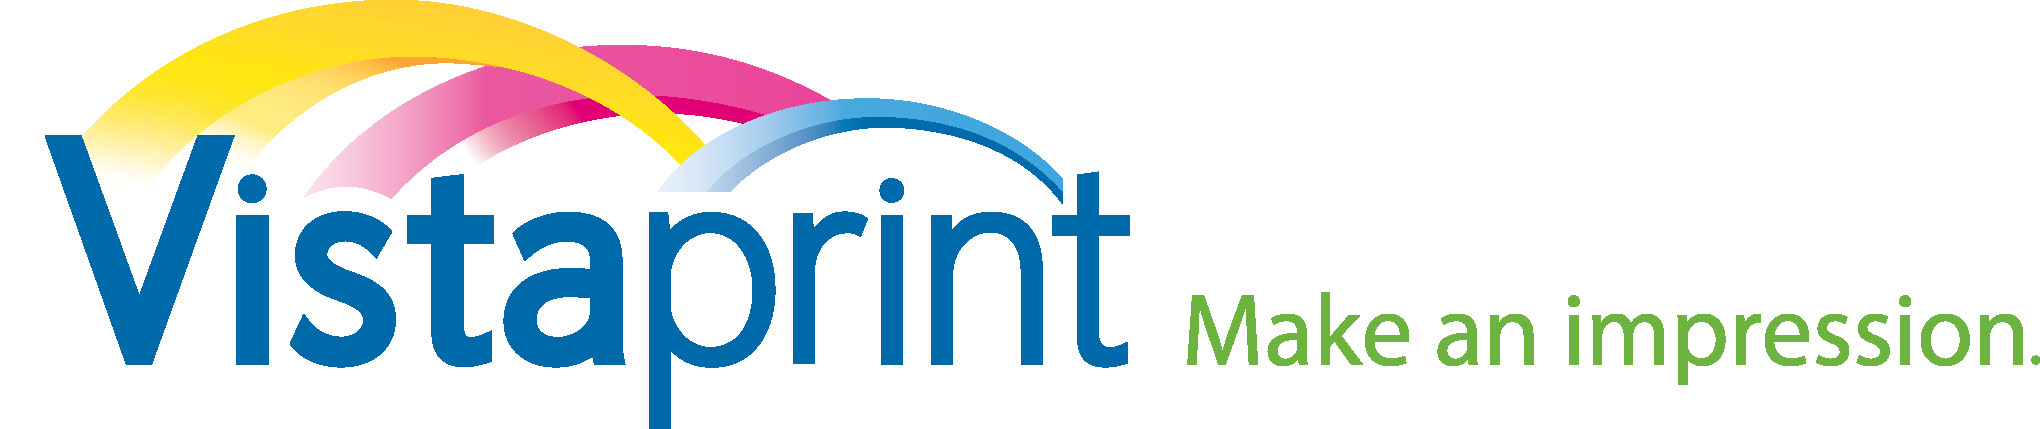 Vistaprint Observes 8% Growth and 40% Time Savings with Marin ...